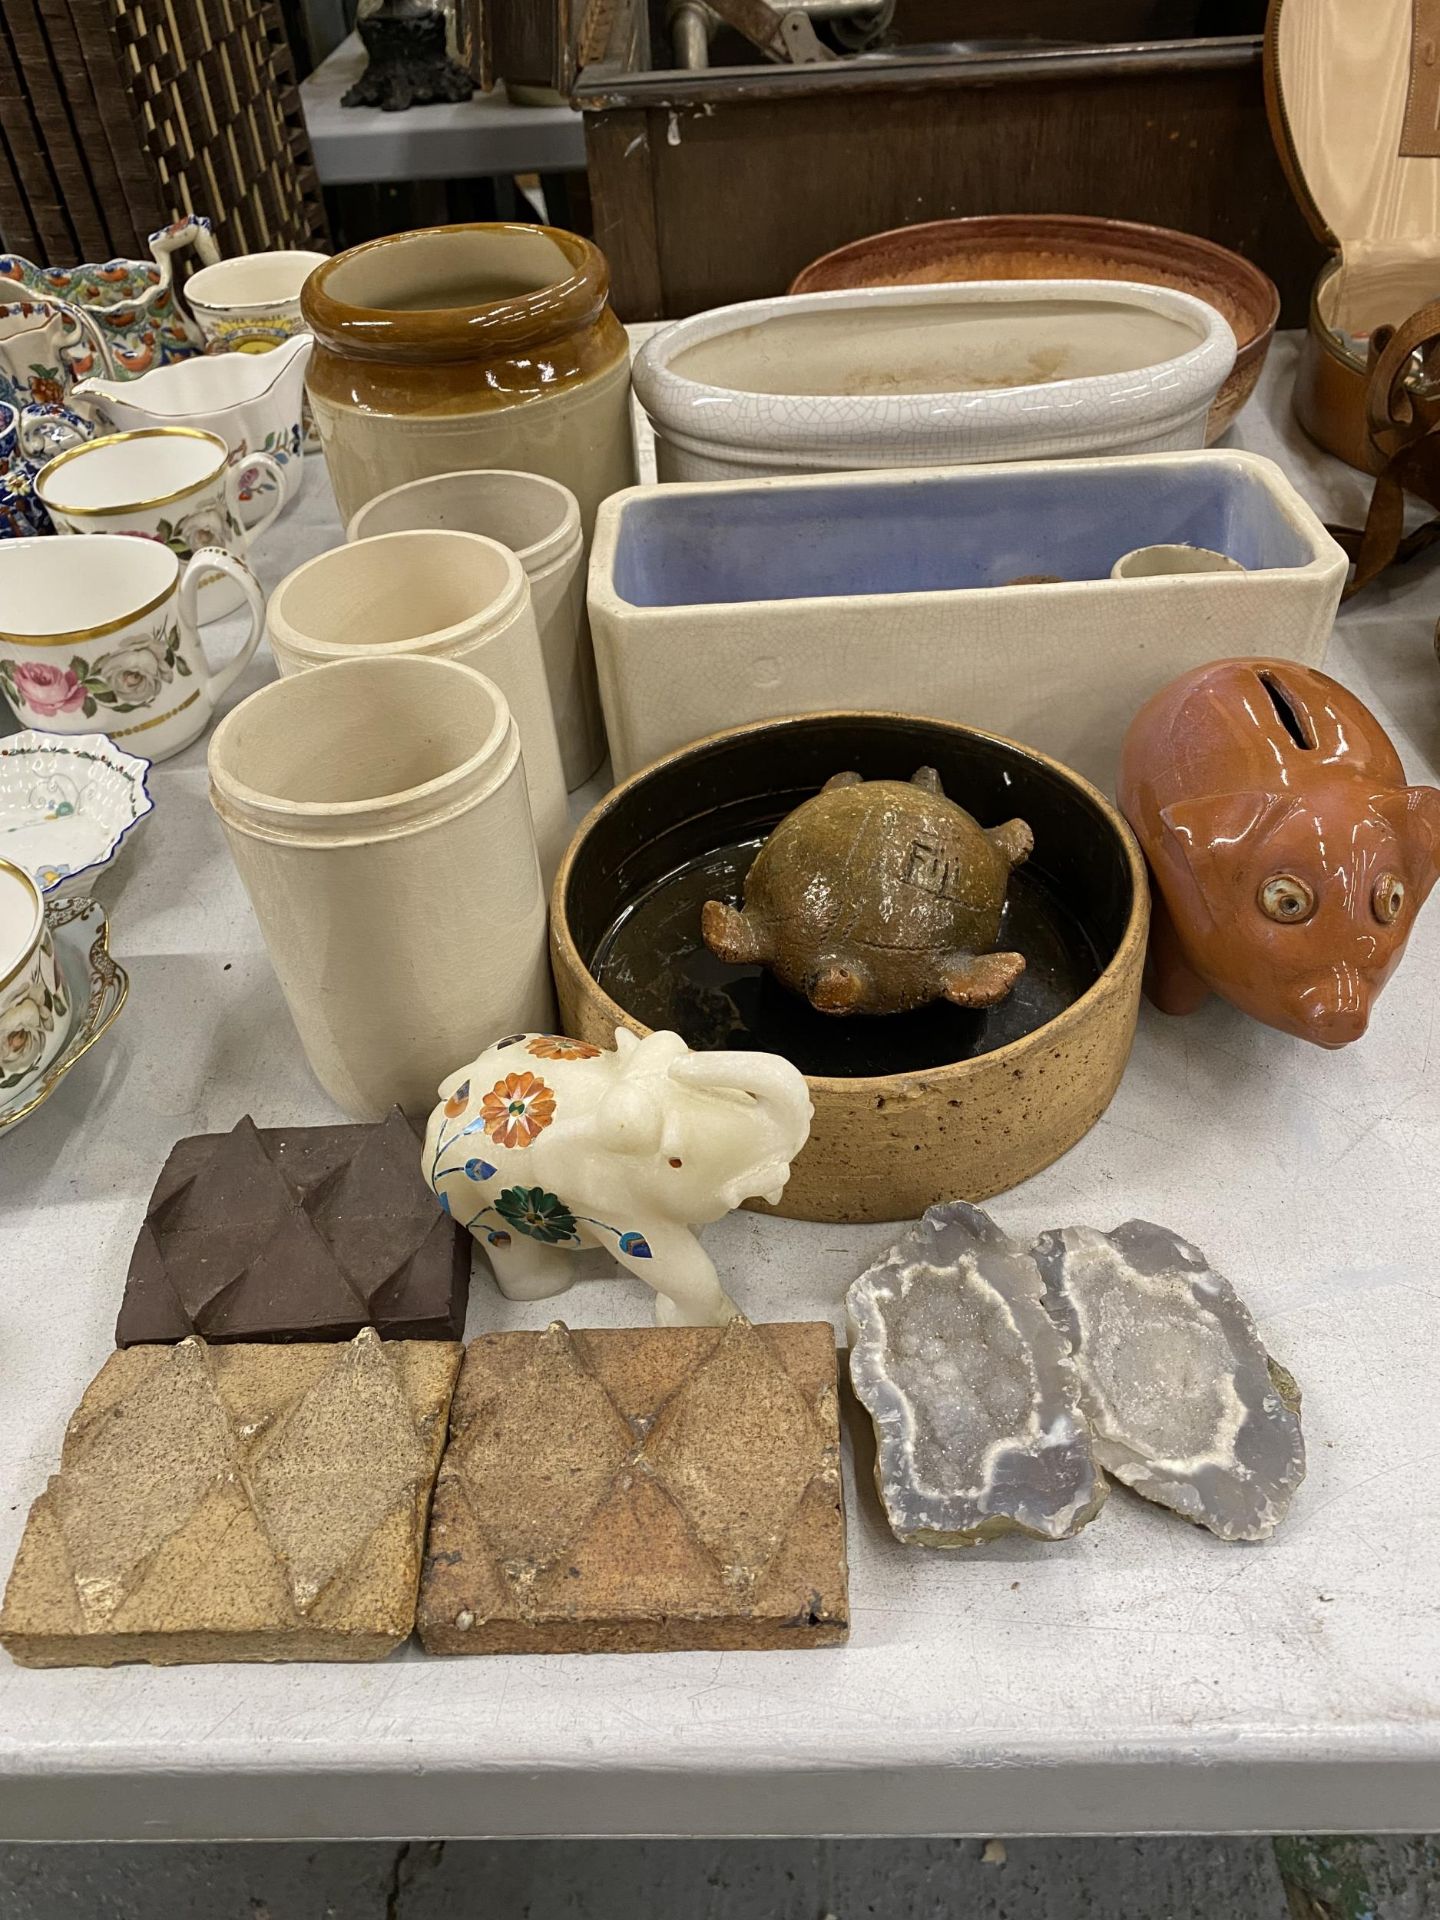 A LARGE QUANTITY OF STONEWARE ITEMS TO INCLUDE MARMALADE POTS, PLANTERS, BOWLS, FIGURES, INLAID - Image 2 of 3